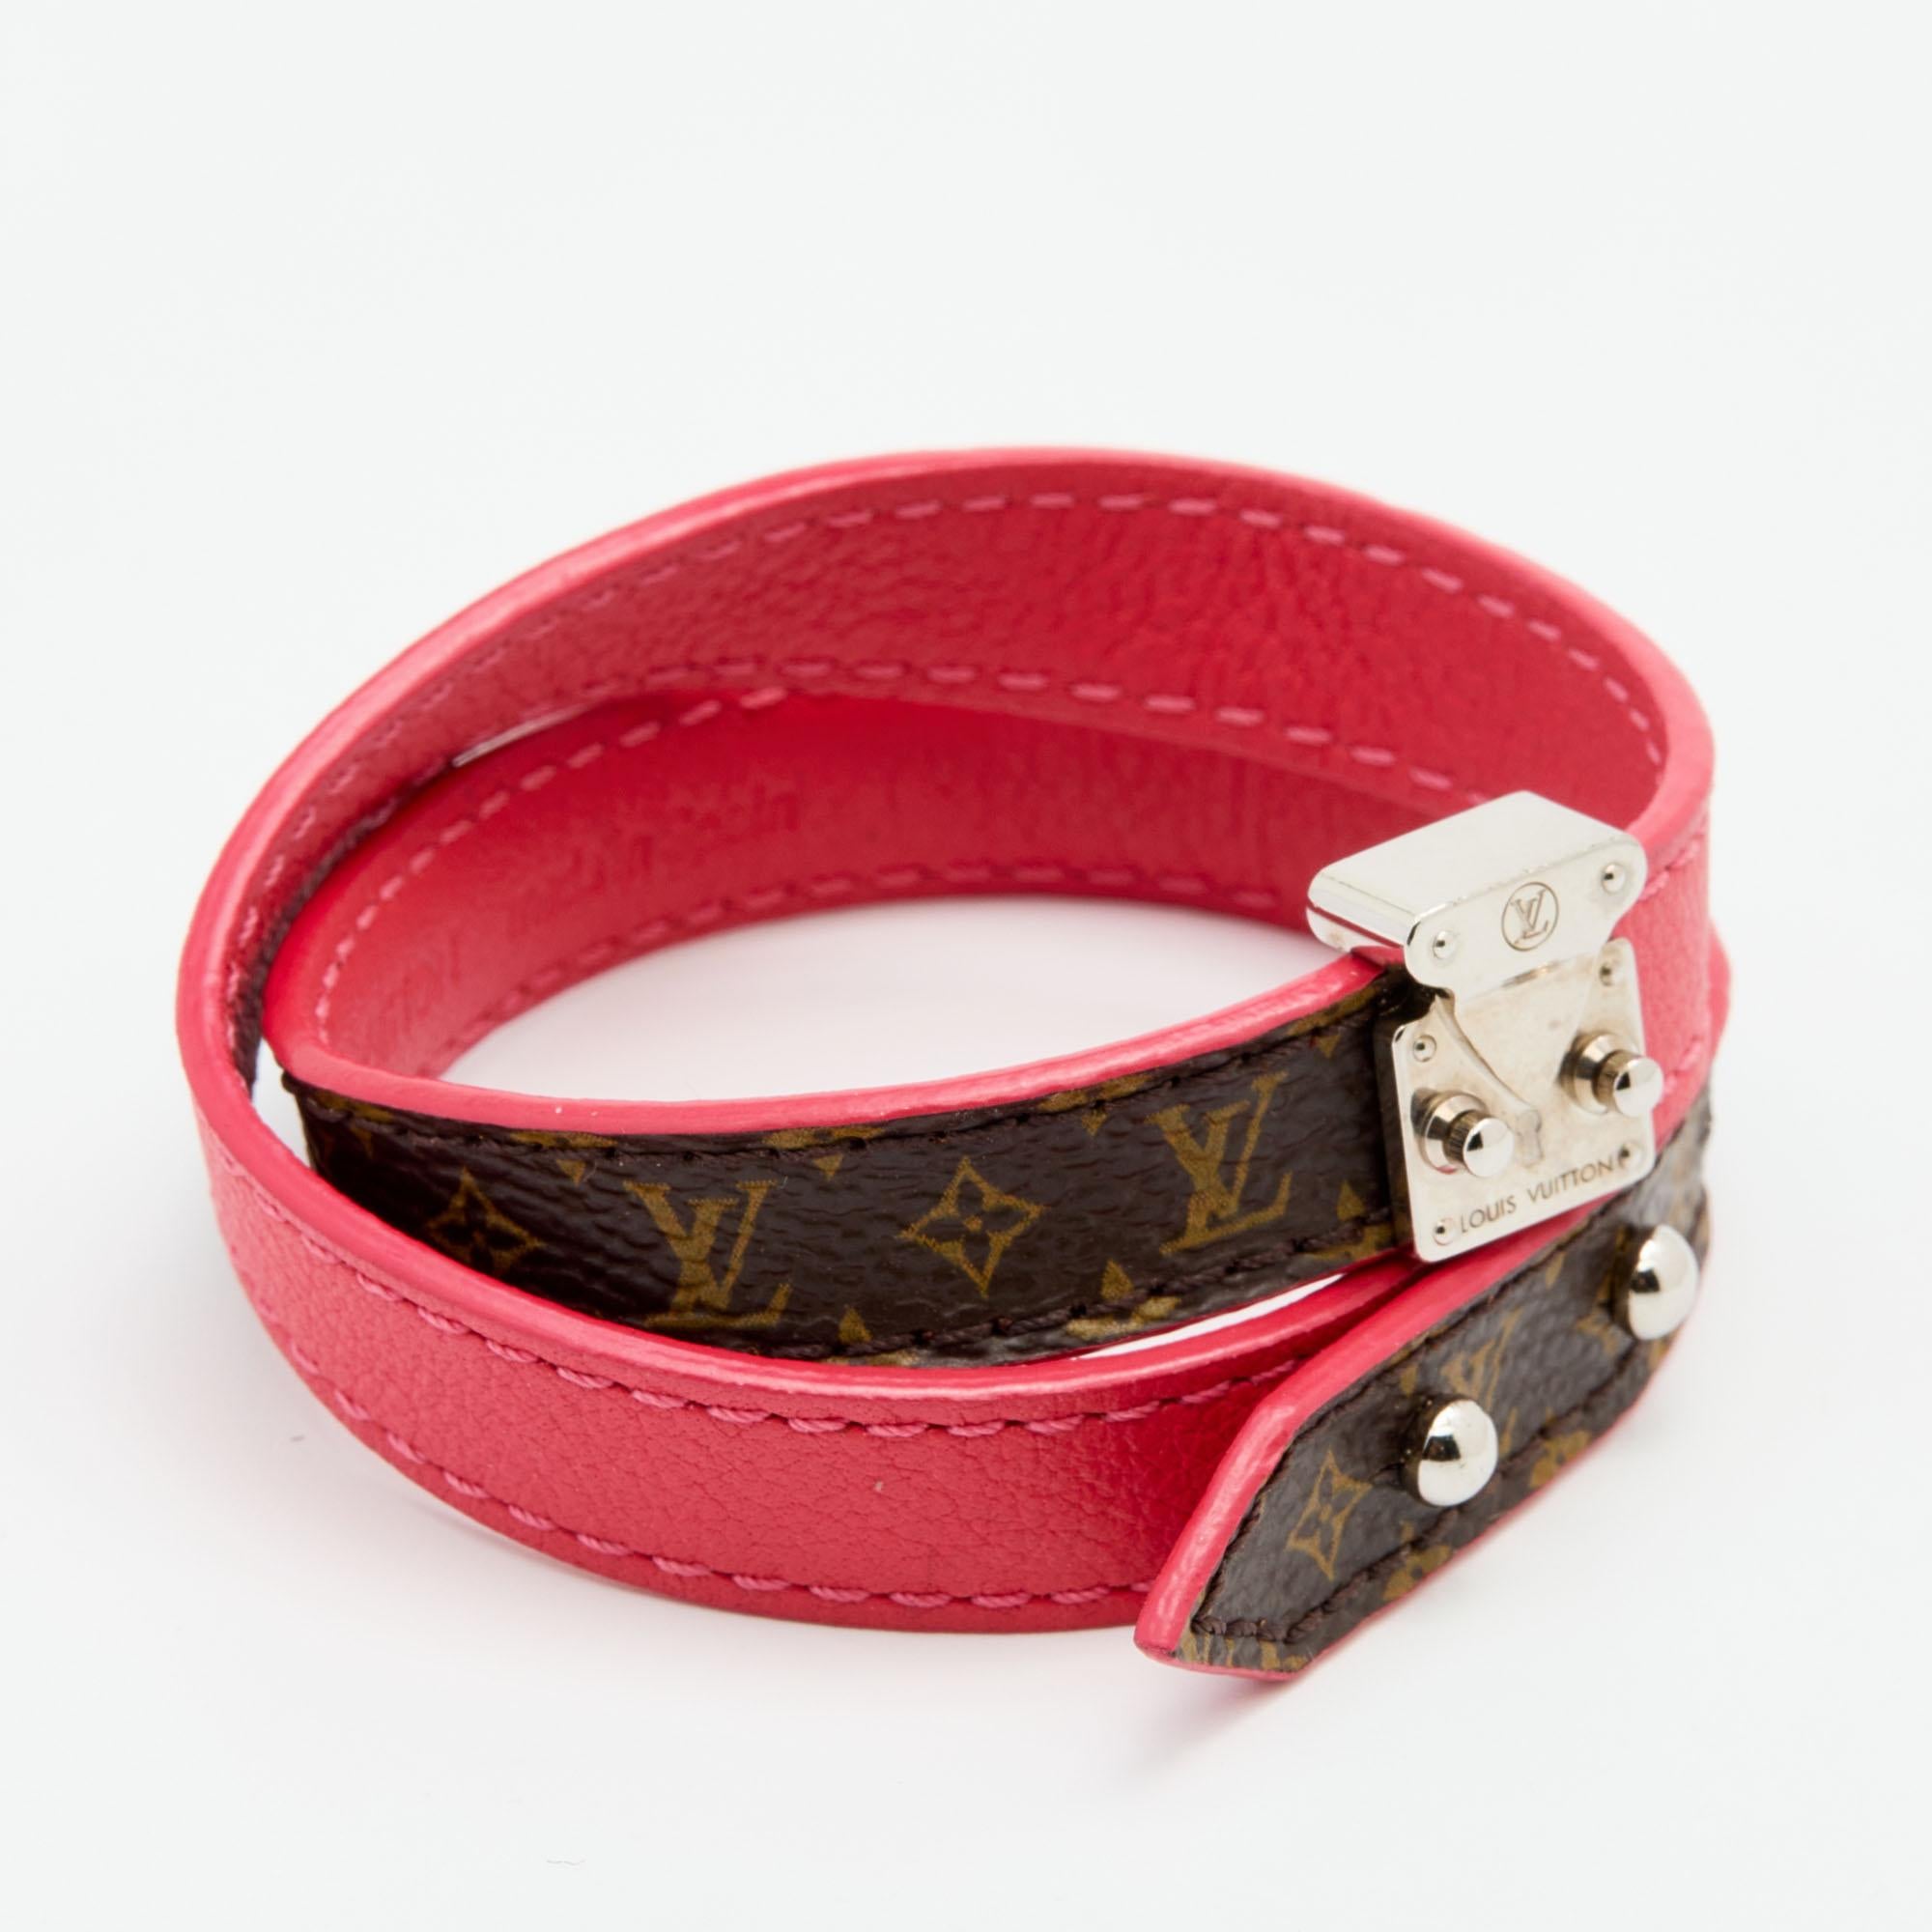 This Louis Vuitton Lockit bracelet is a chic accessory that can be paired with everything, from casuals to evening outfits. Made from monogram canvas and leather, it is beautified with an S lock in silver-tone metal. The bracelet has a long strap